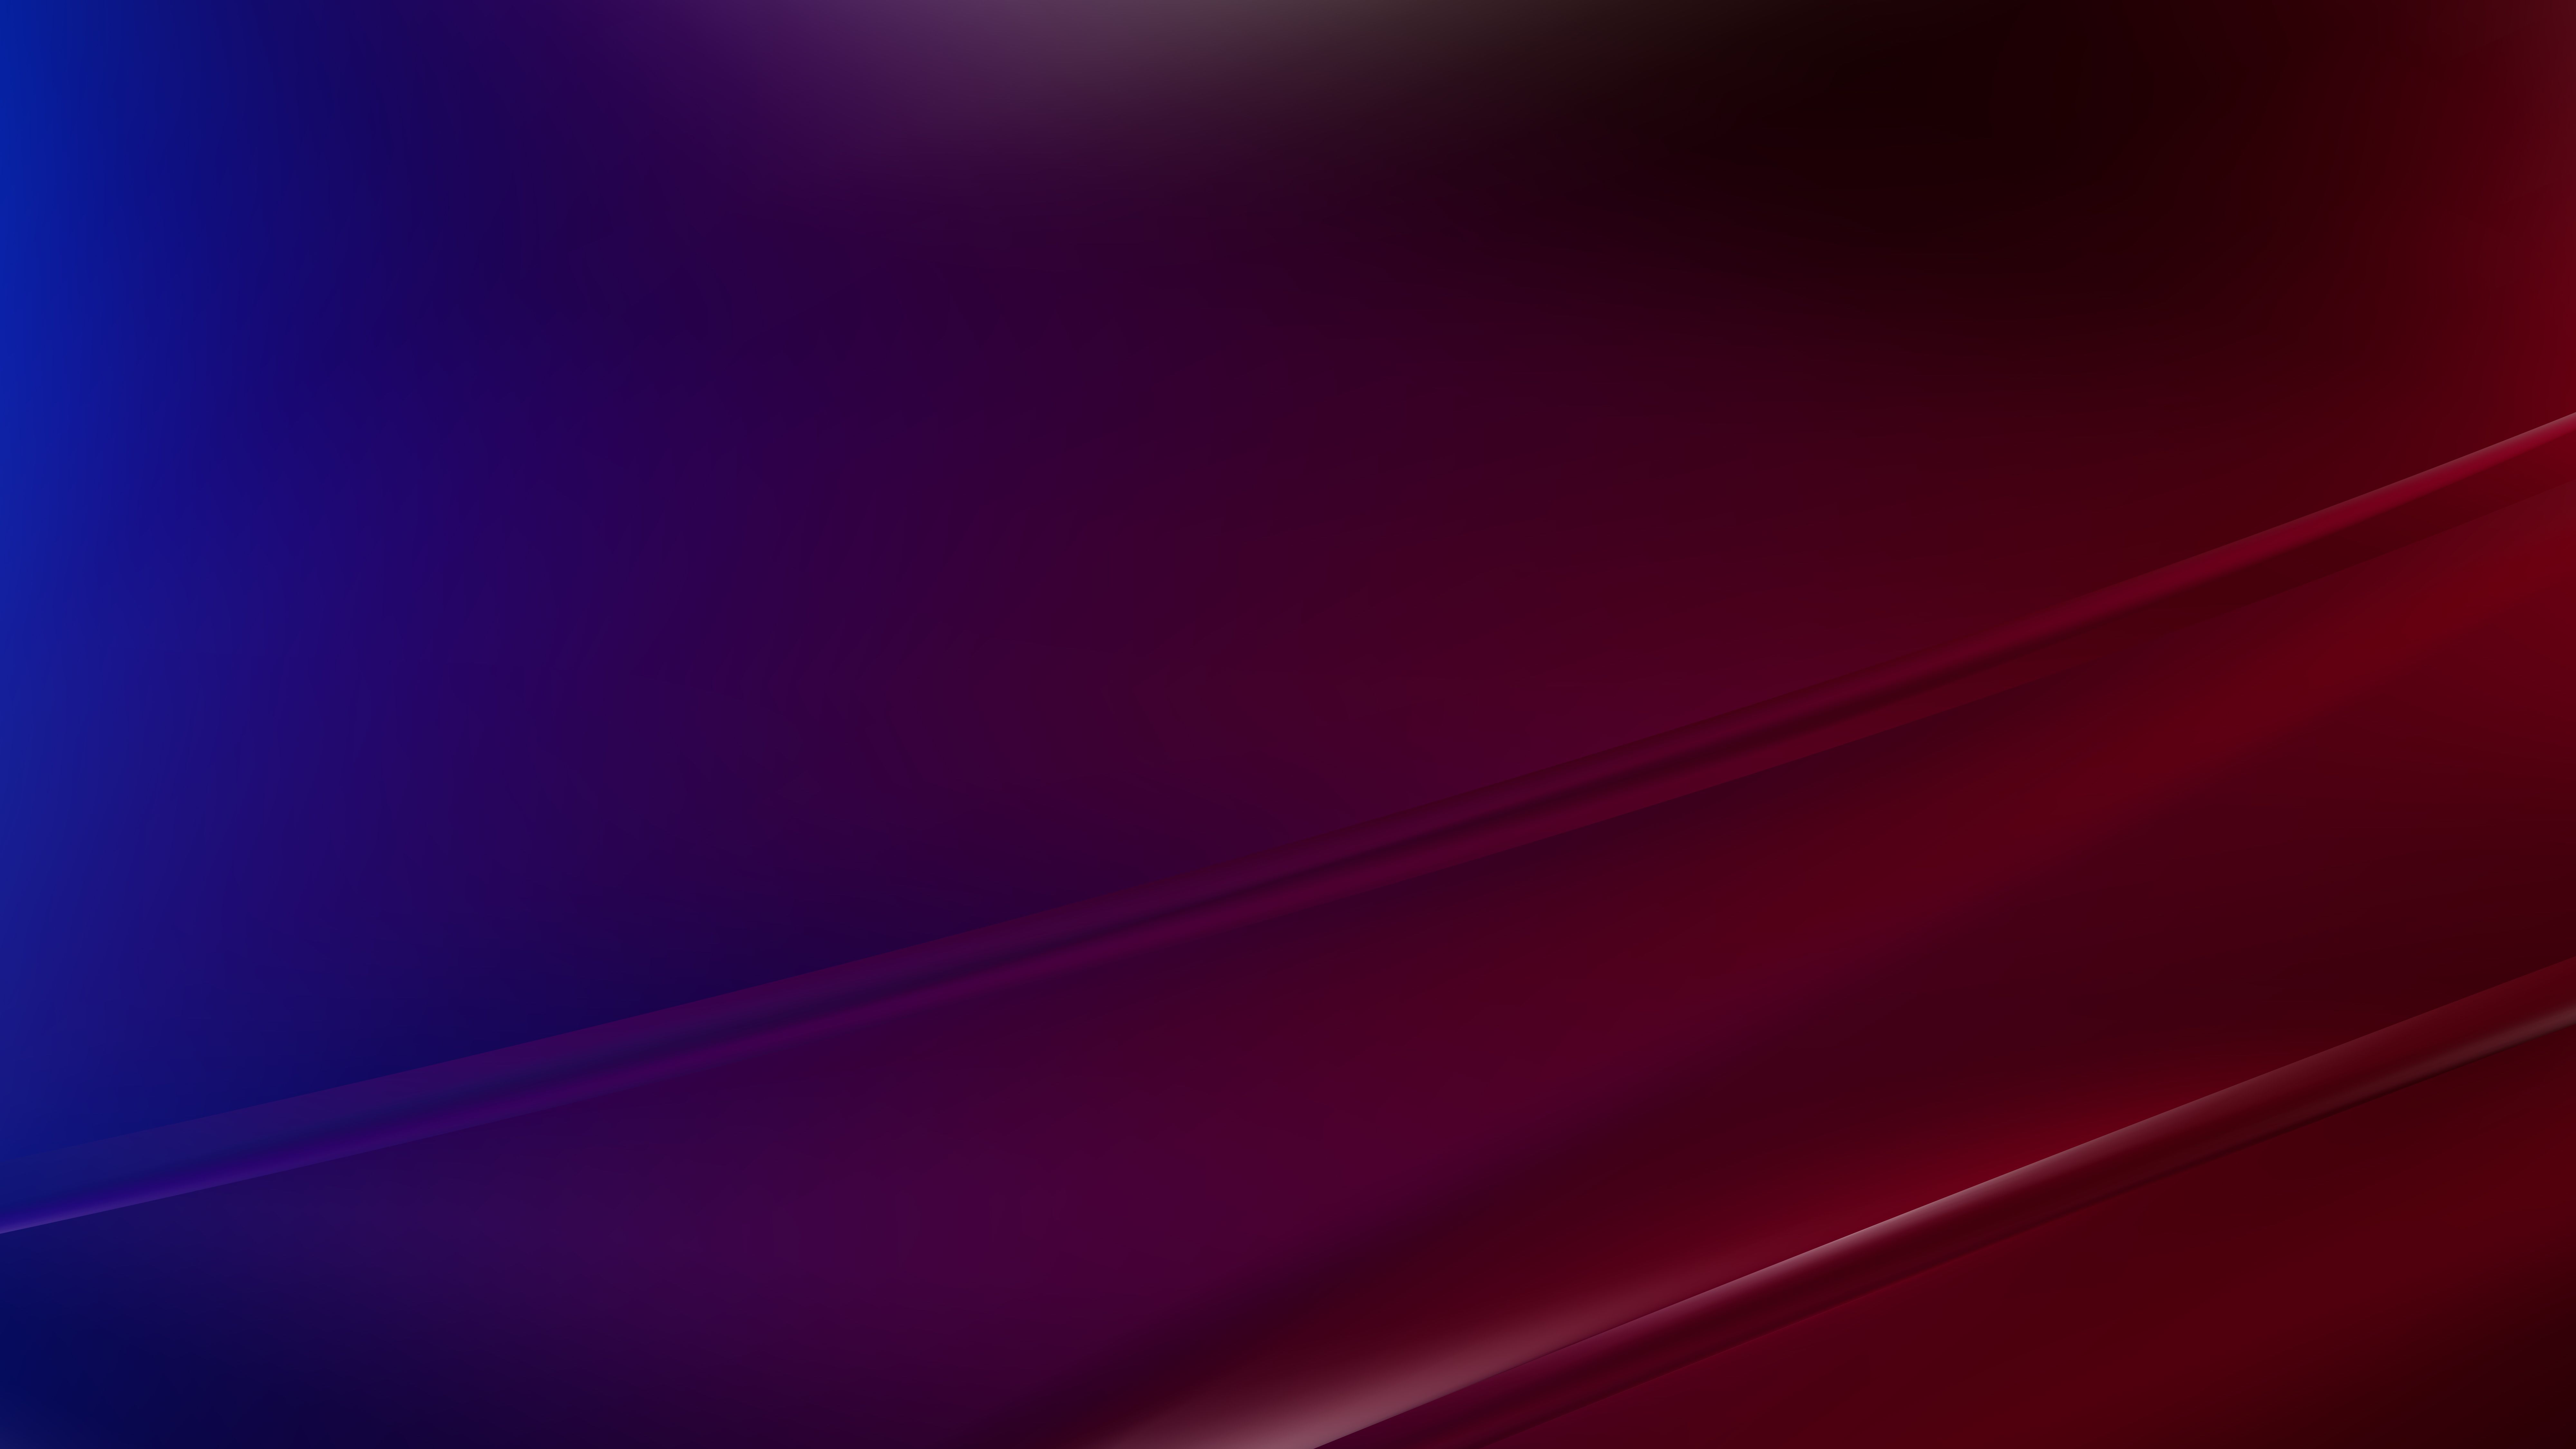 Dark Red And Blue Wallpapers - 4K, Hd Dark Red And Blue Backgrounds On